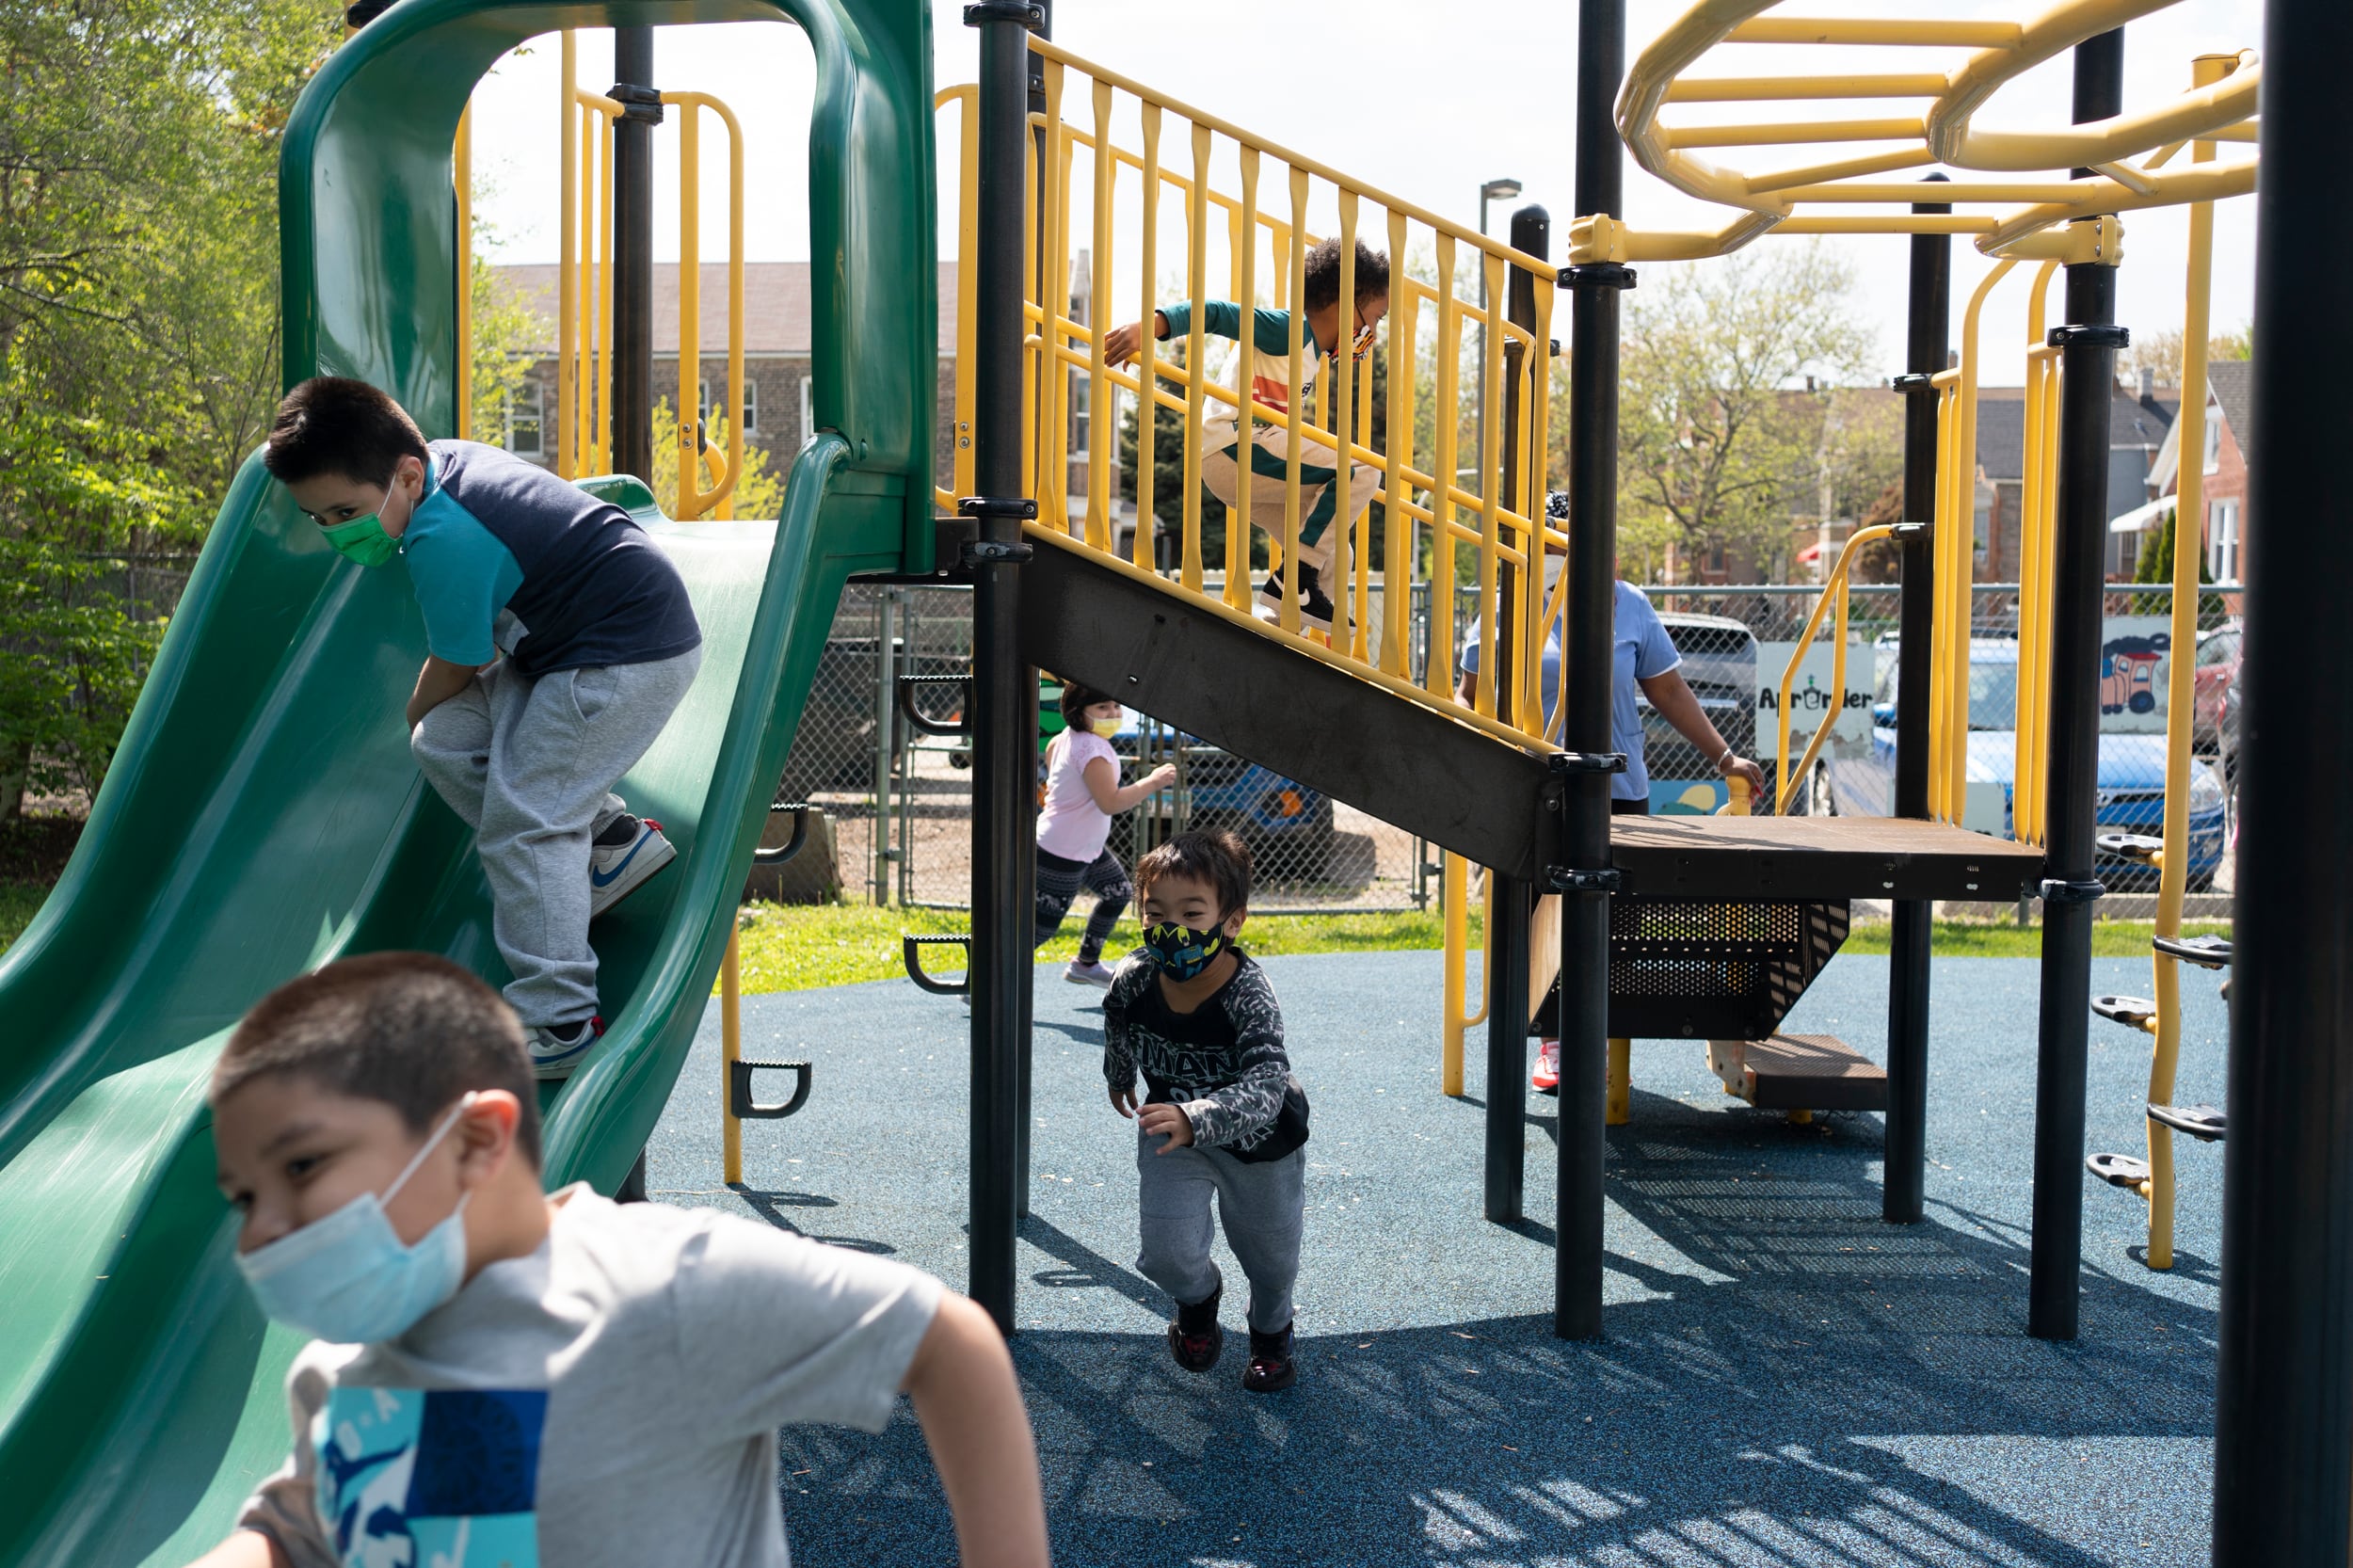 Several children play on a green and yellow outdoor play structure in Chicago.